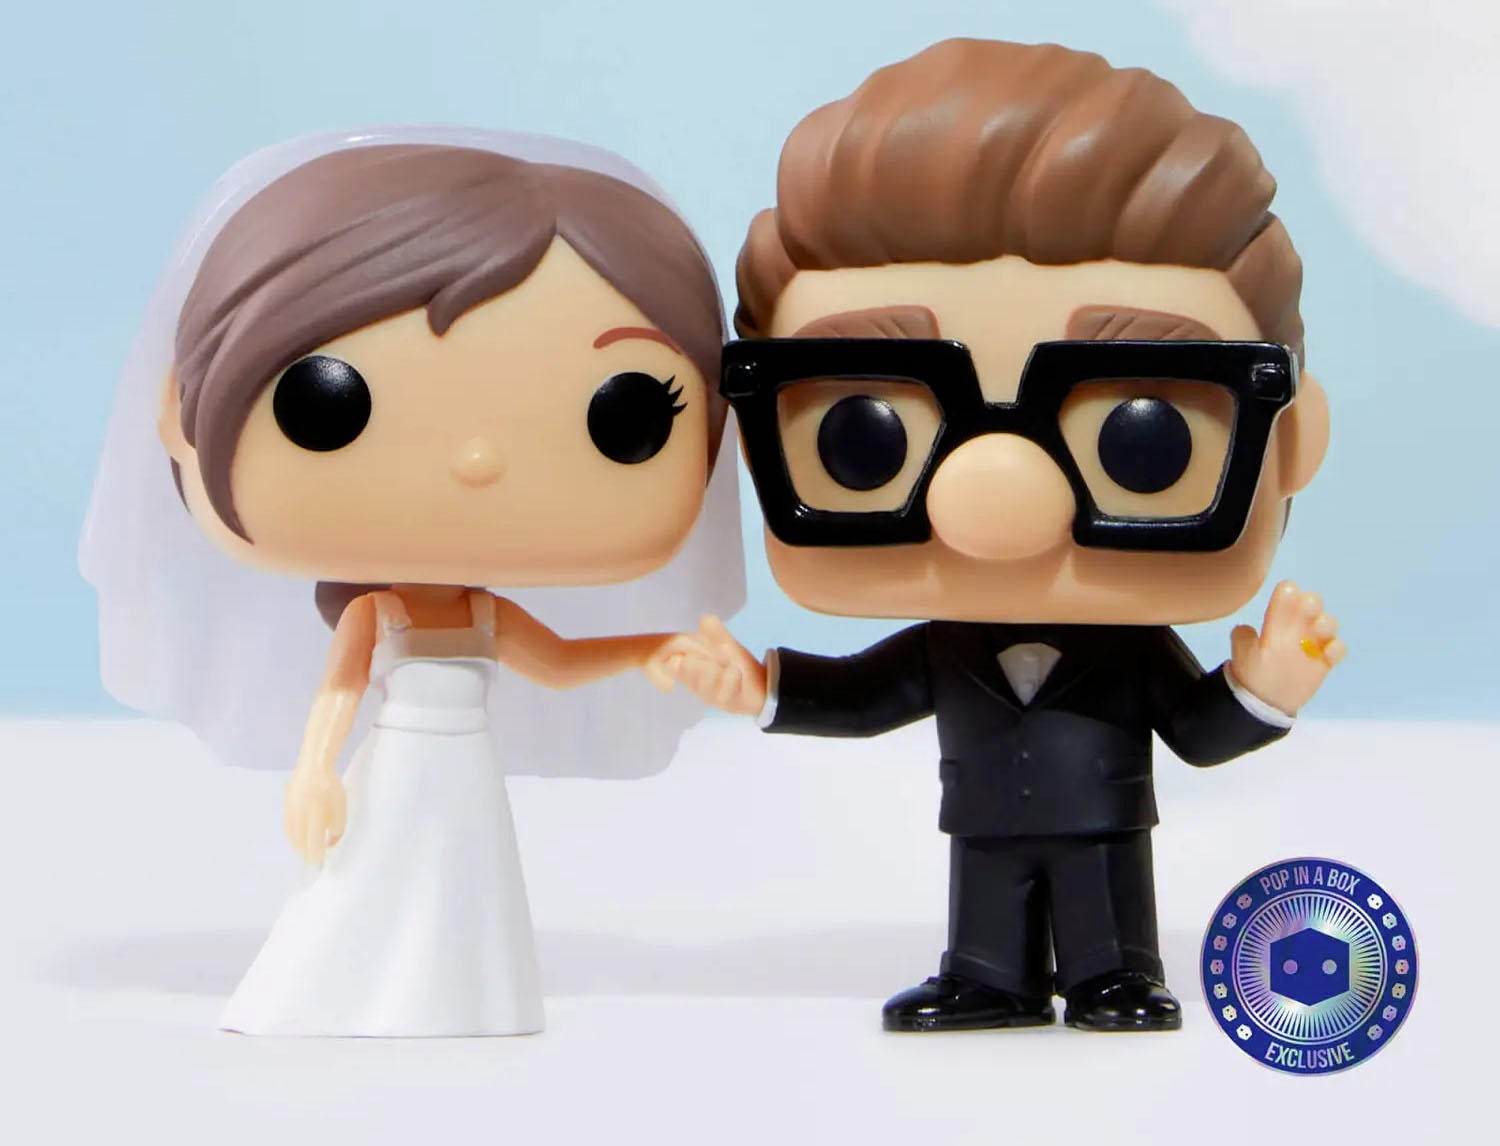 Ellie and Carl From Disney's Up are Together Forever In This Wedding